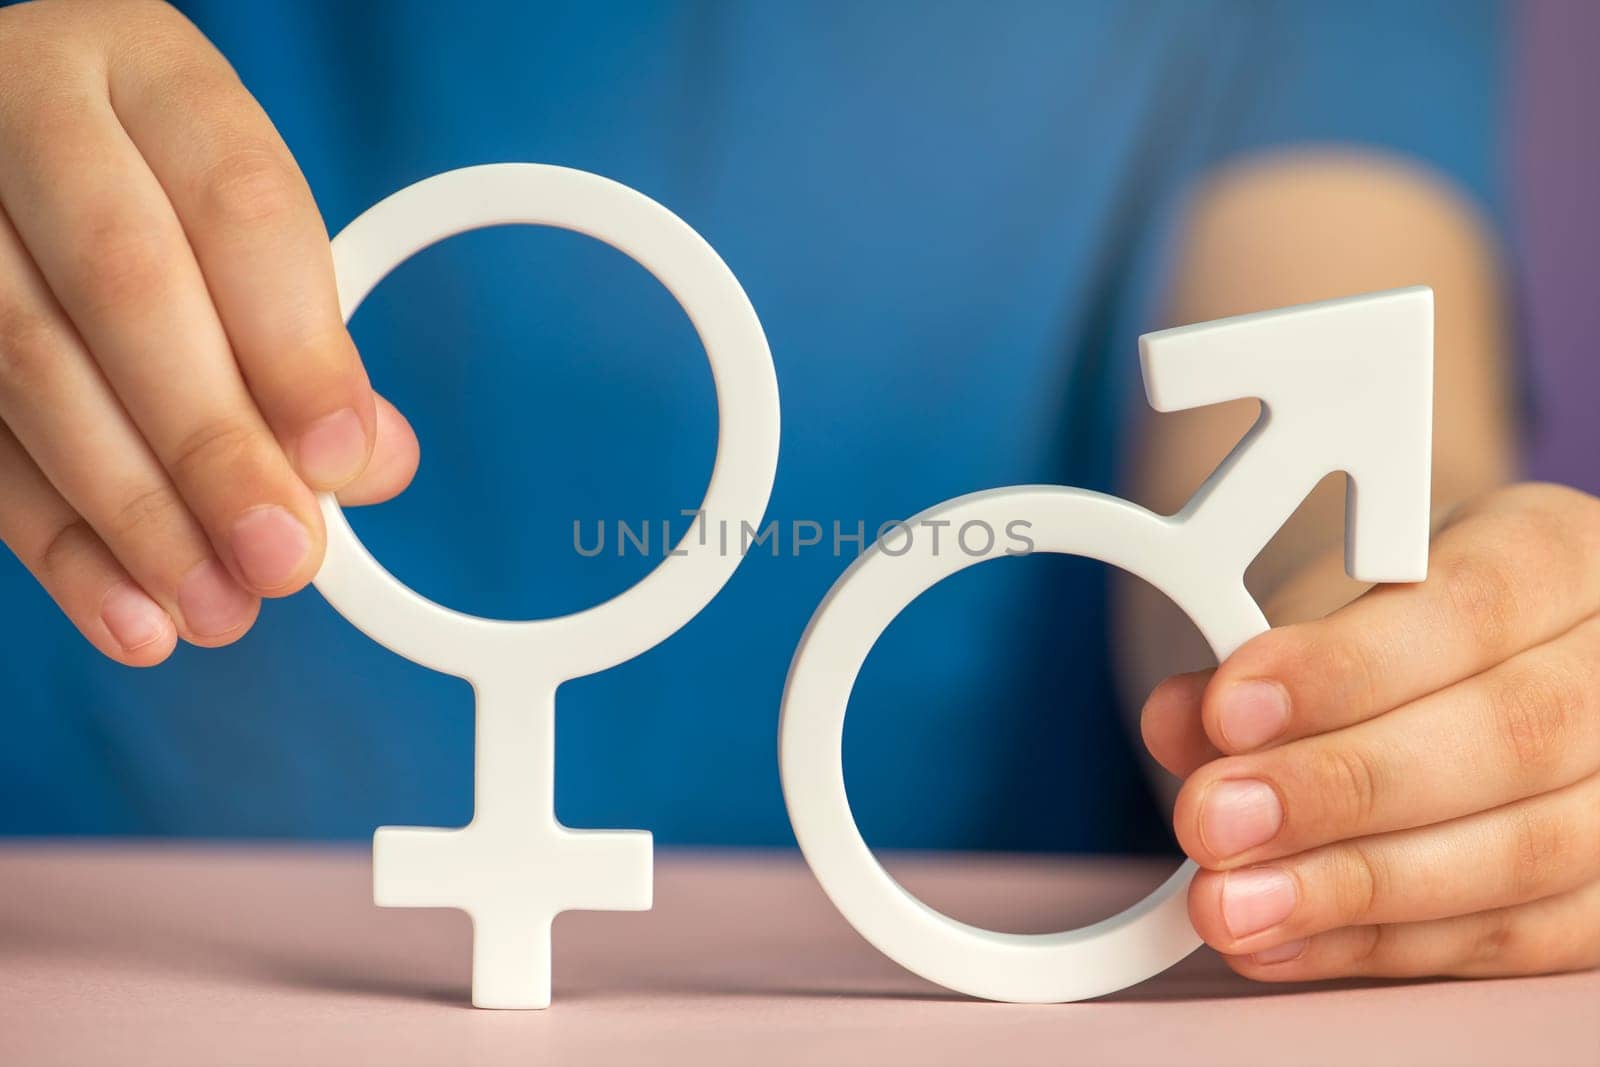 The concept of gender equality. Symbol of female and male gender in hand as a symbol of equality of rights. On a purple background in a blue t-shirt with copy space by SERSOL